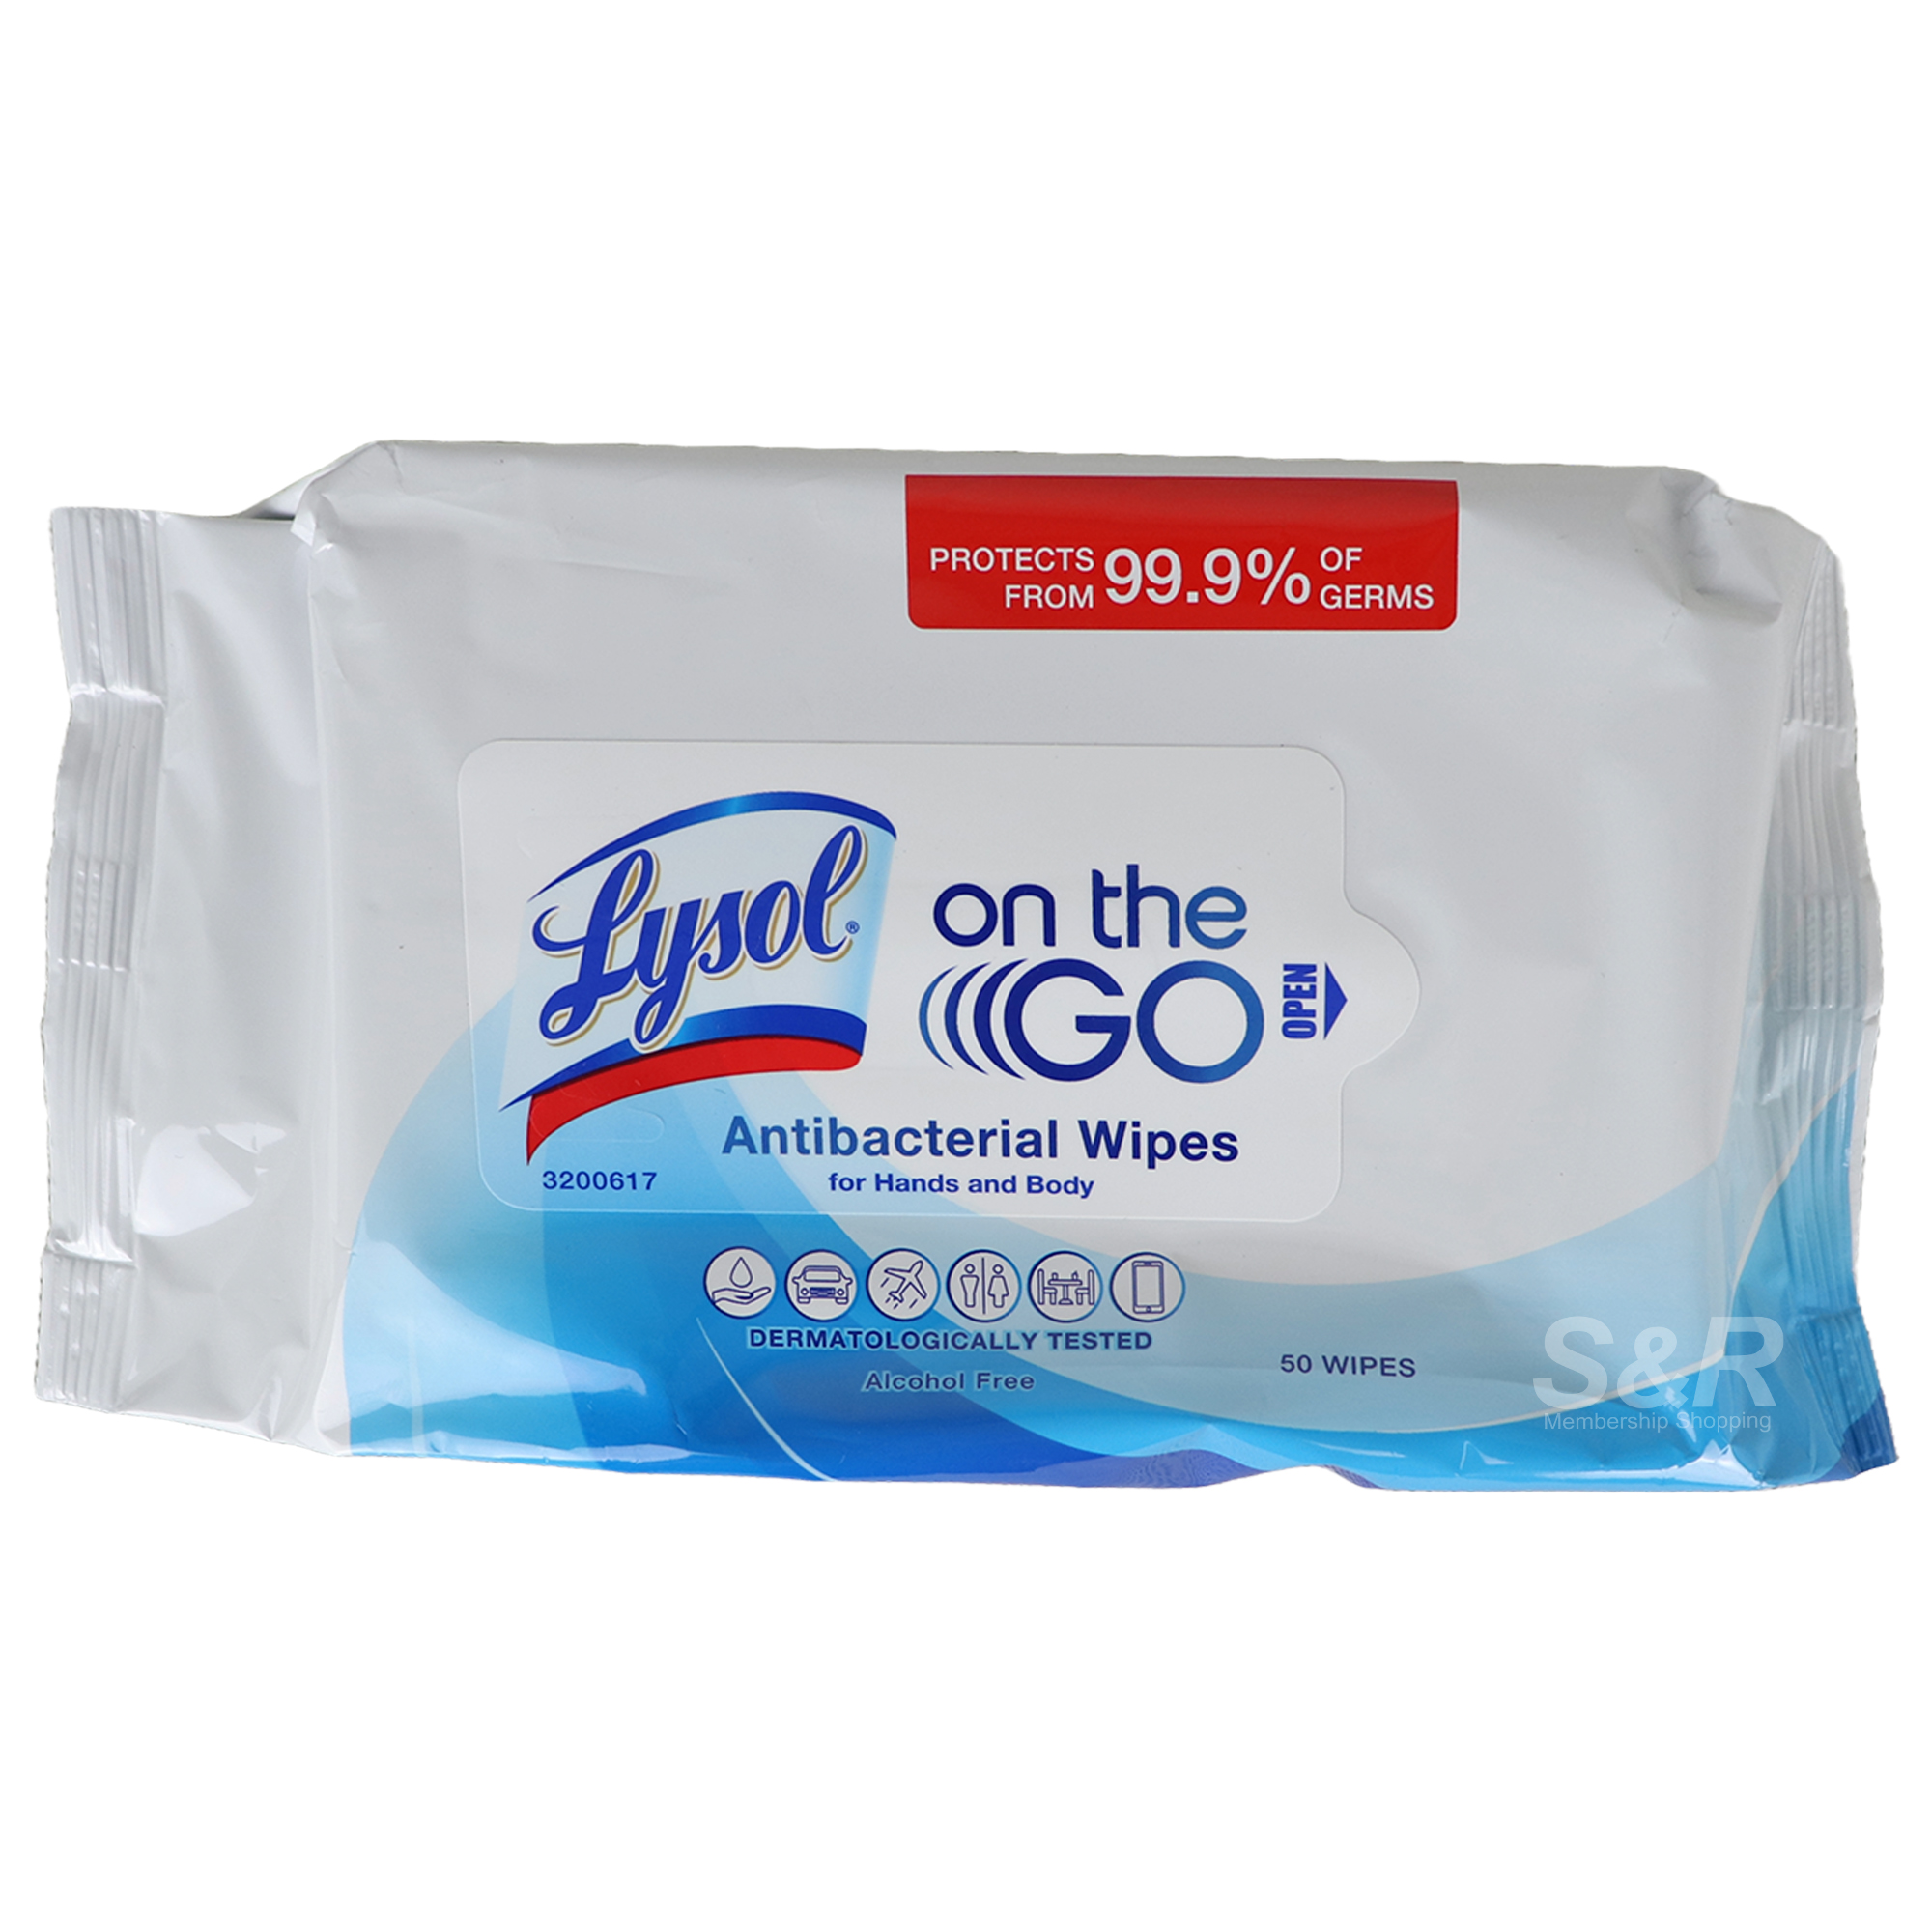 Lysol On The Go Antibacterial Wipes (Hands and Body) 50pcs